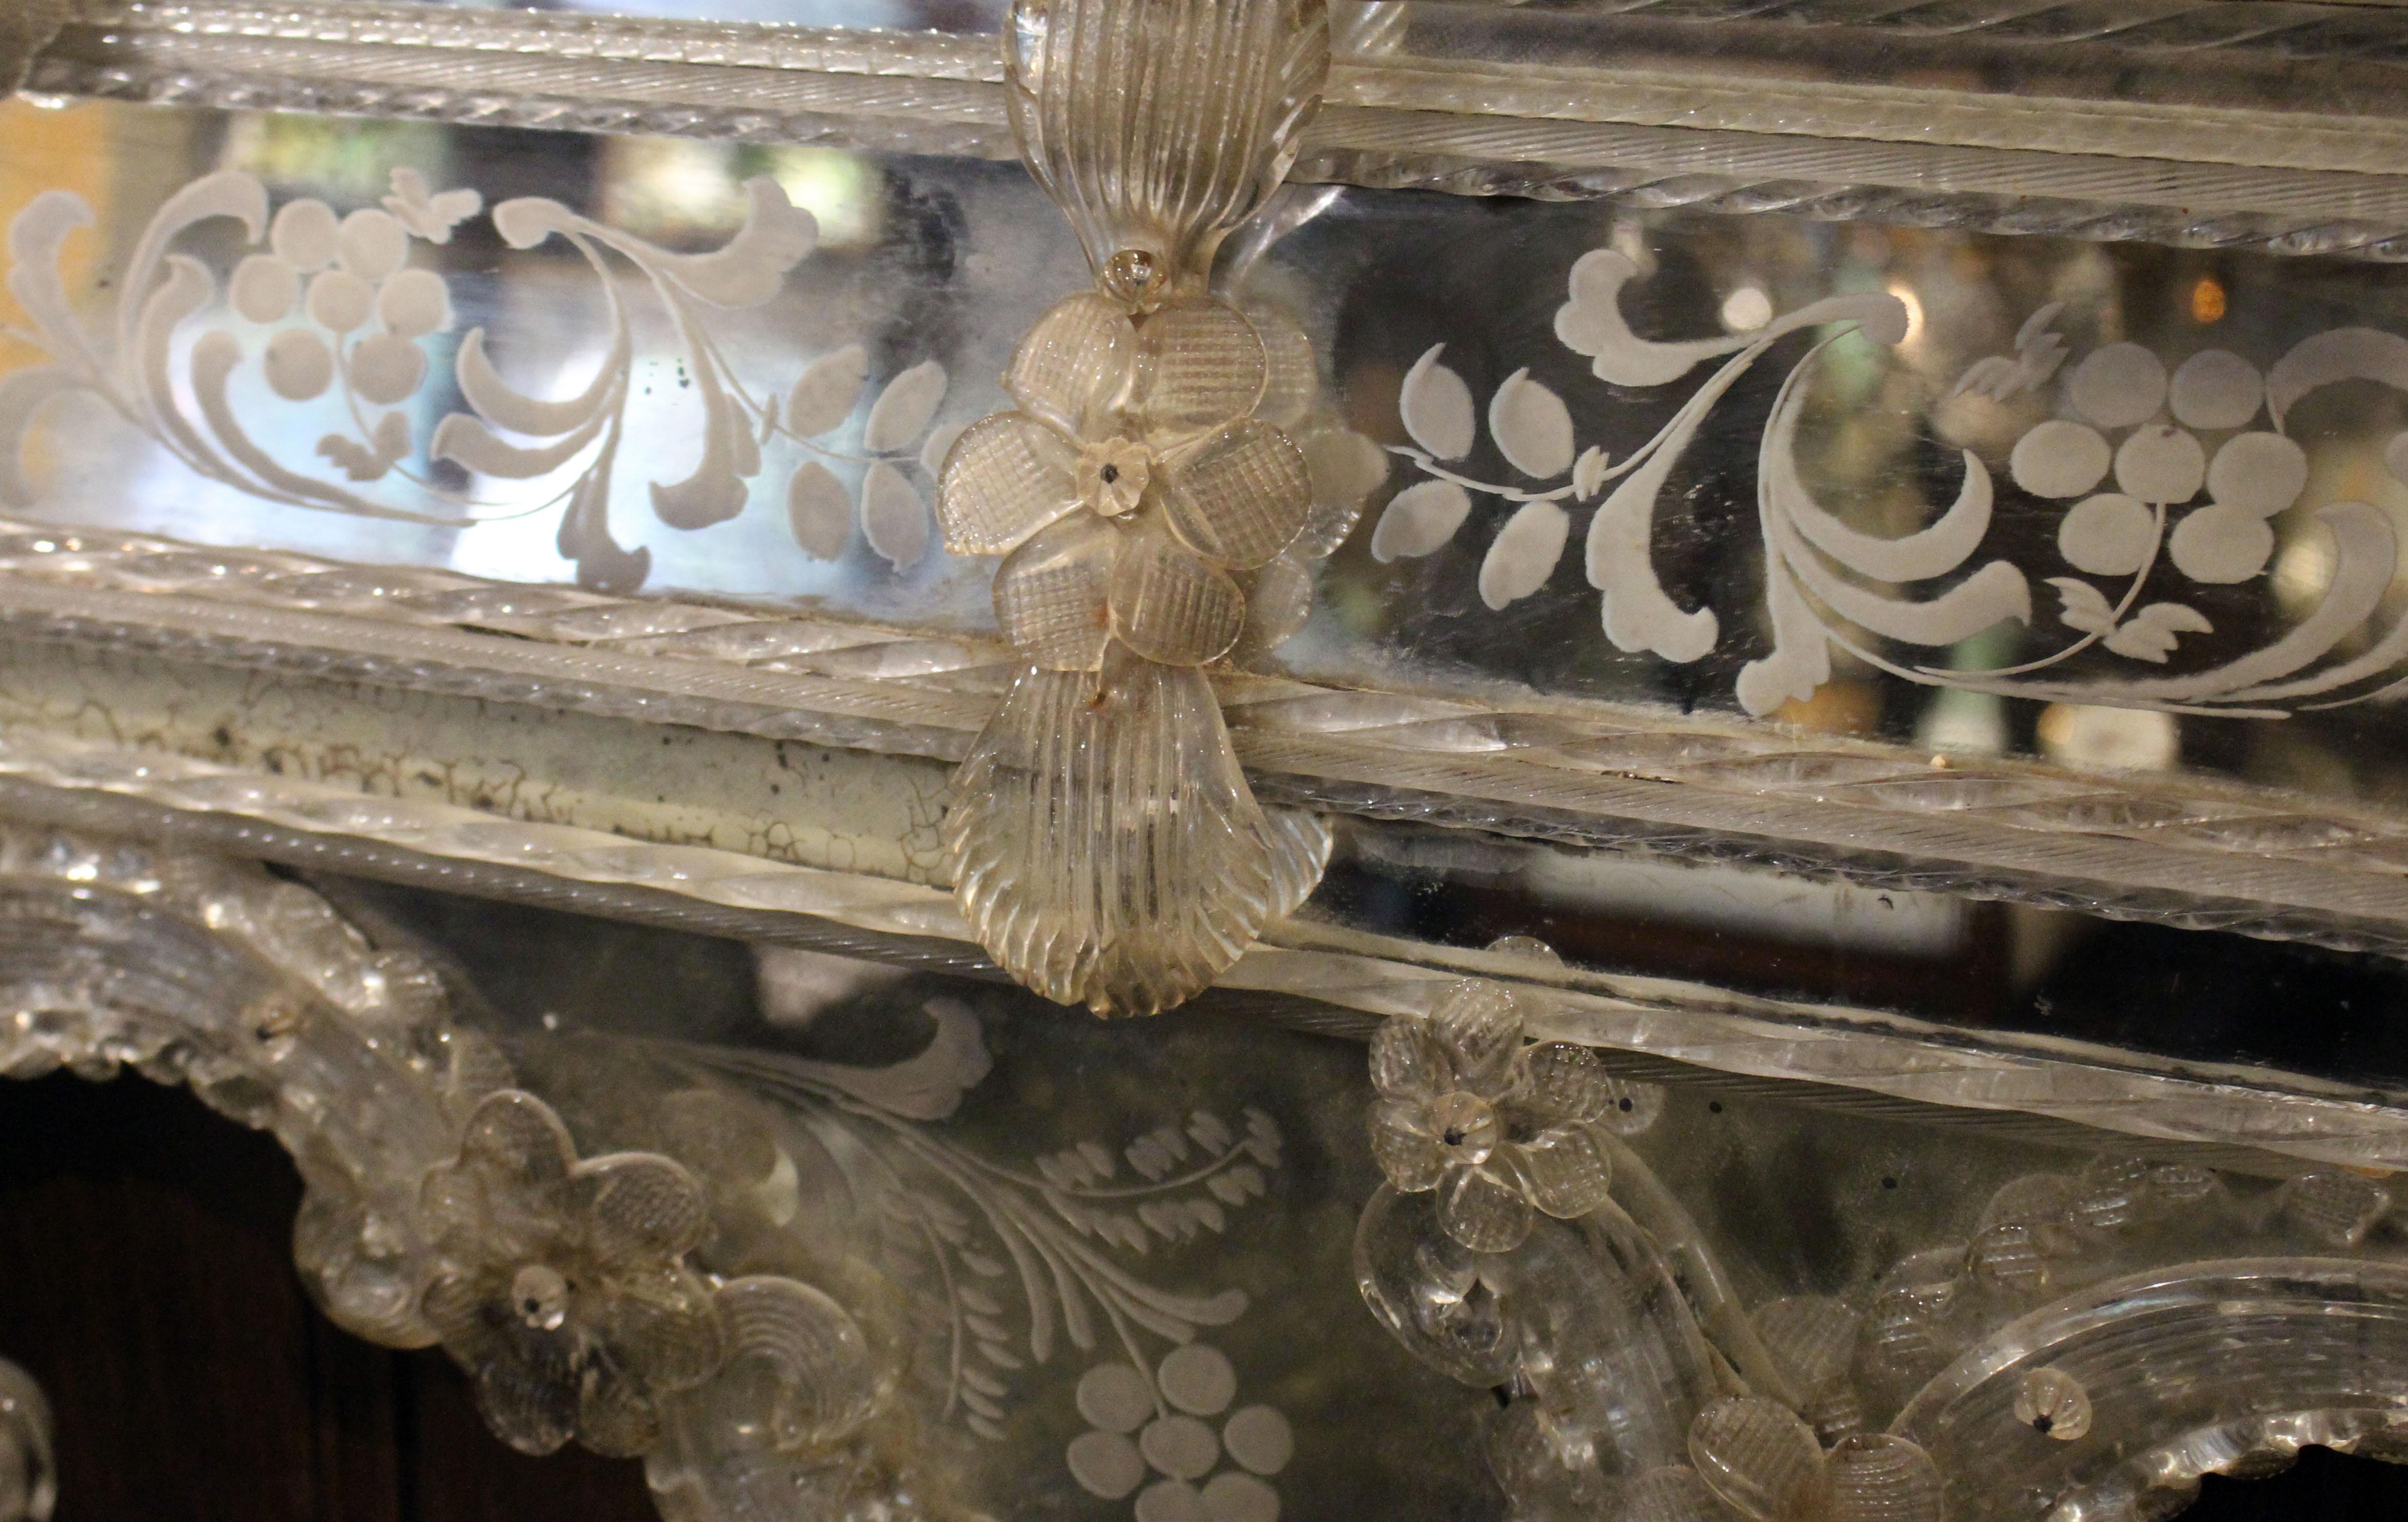 Etched Early-Mid 19th Century Baroque-Rococo Transitional Revival Venetian Mirror